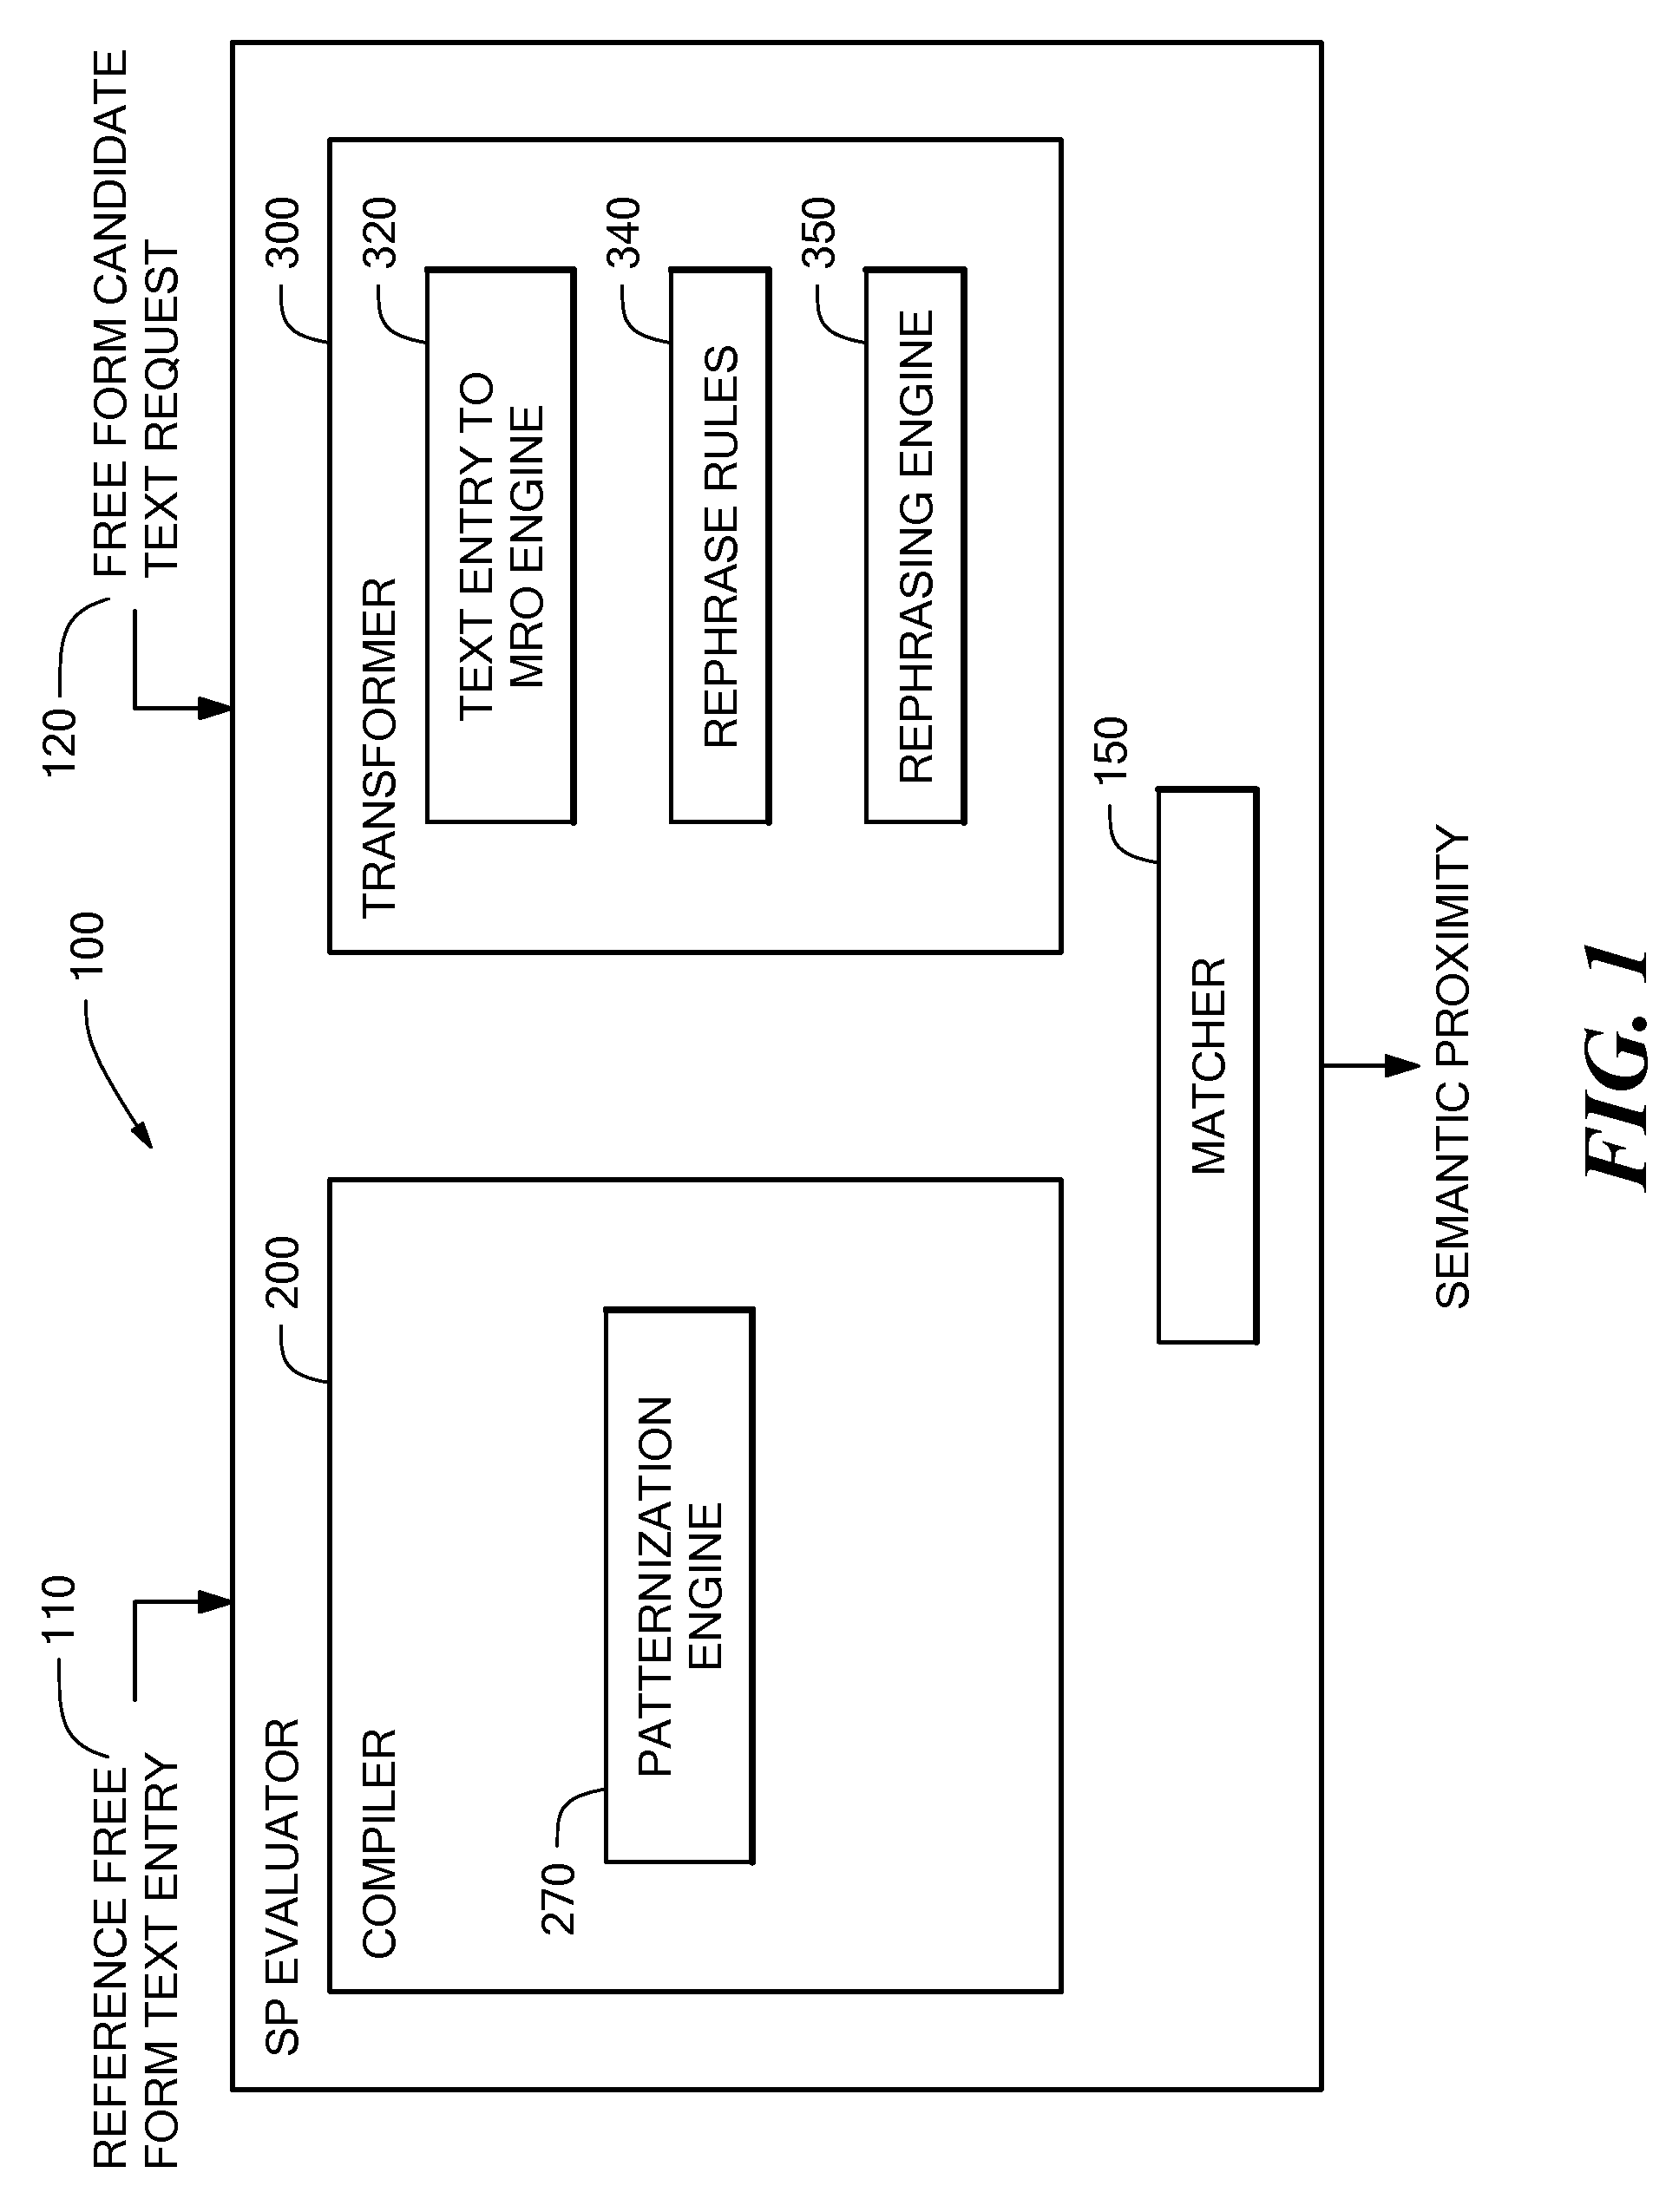 Methods and apparatus for evaluating semantic proximity